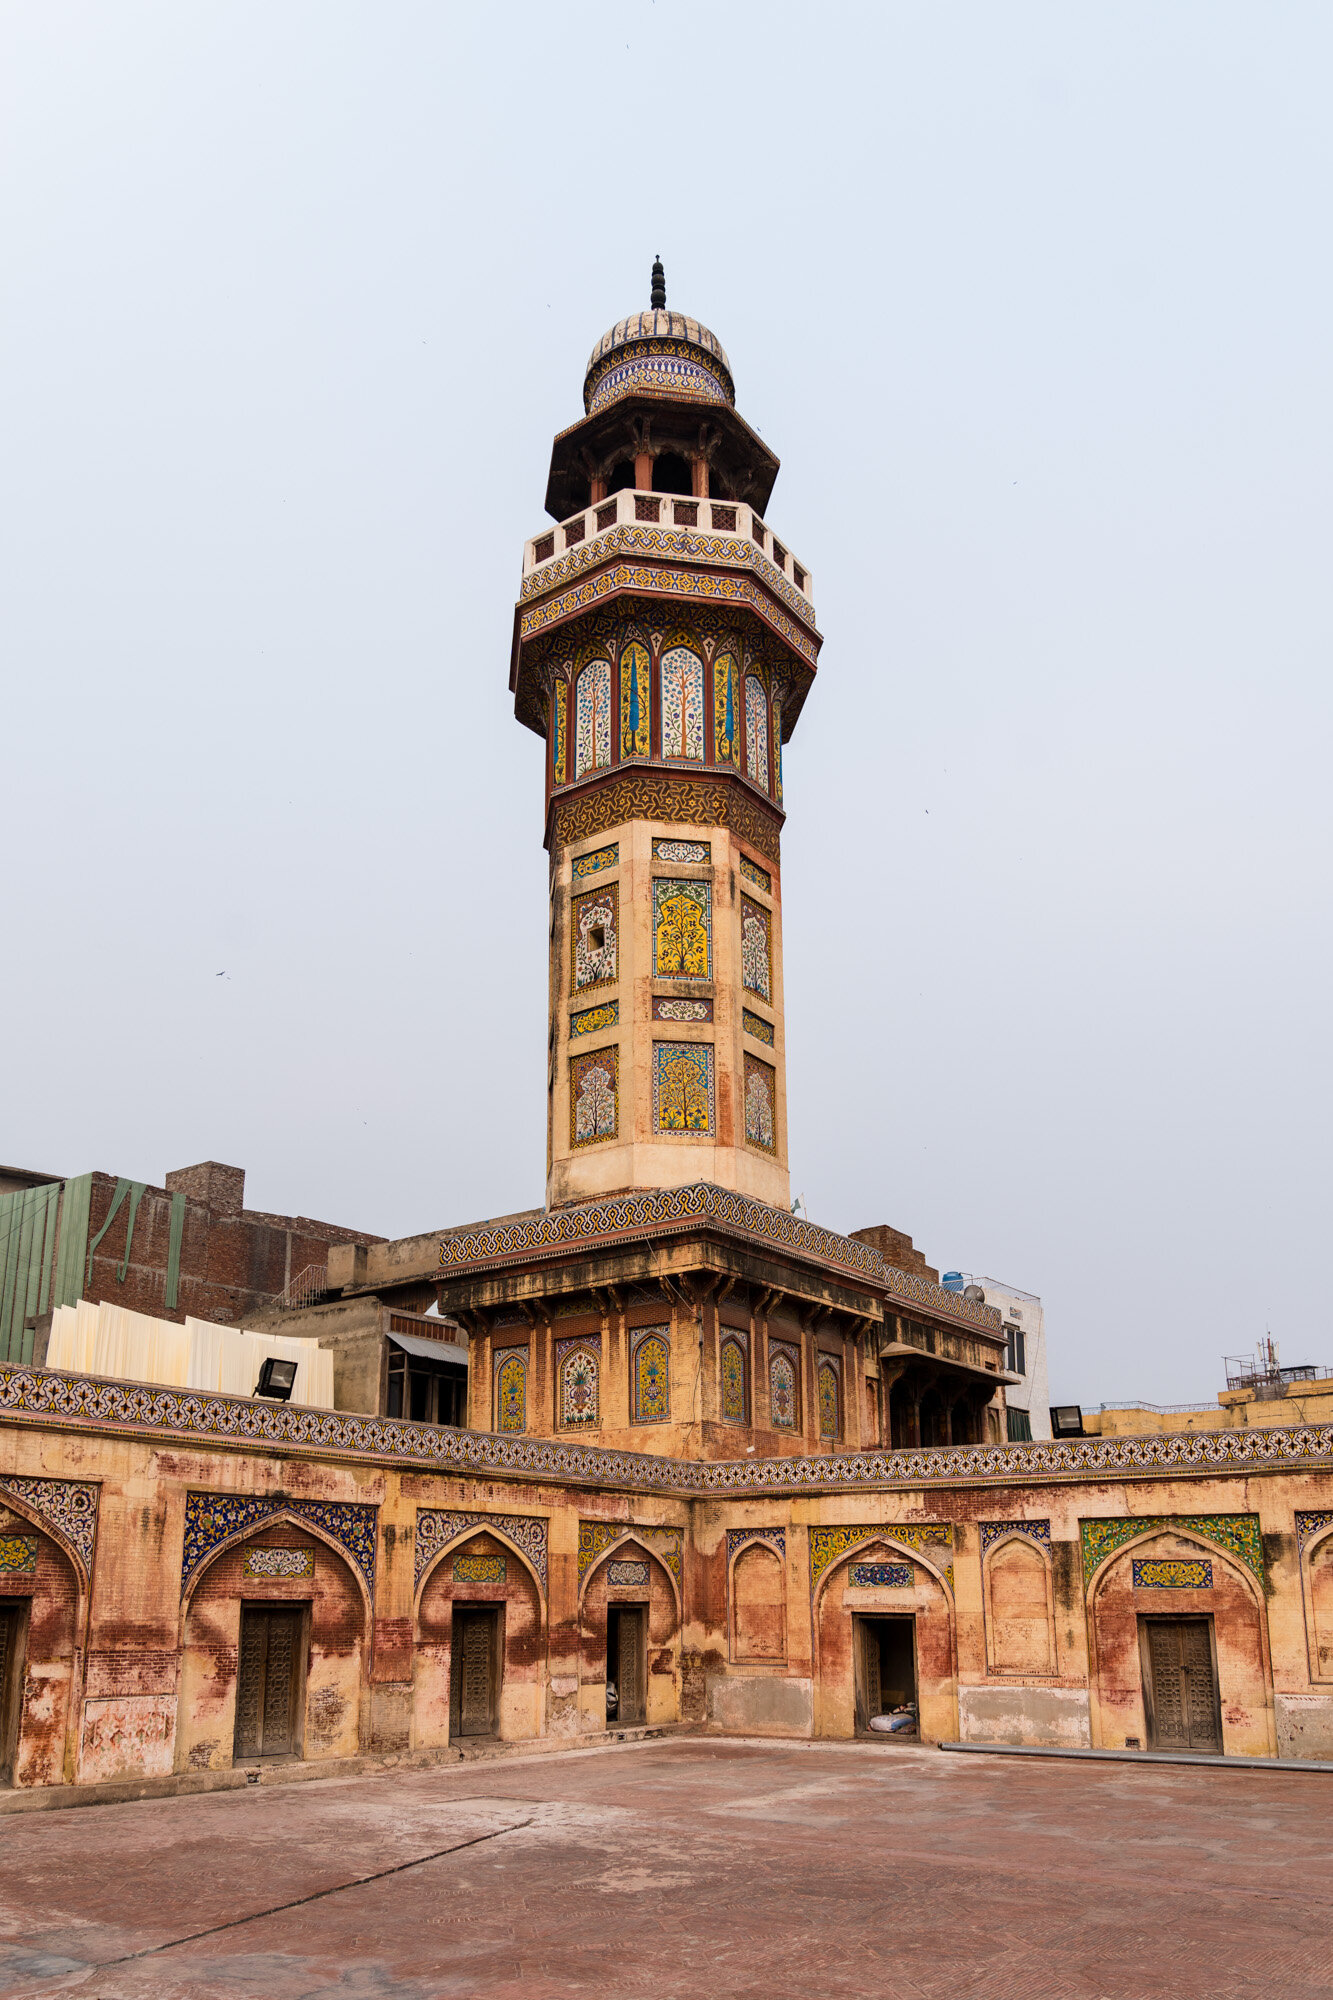  One of the minarets 